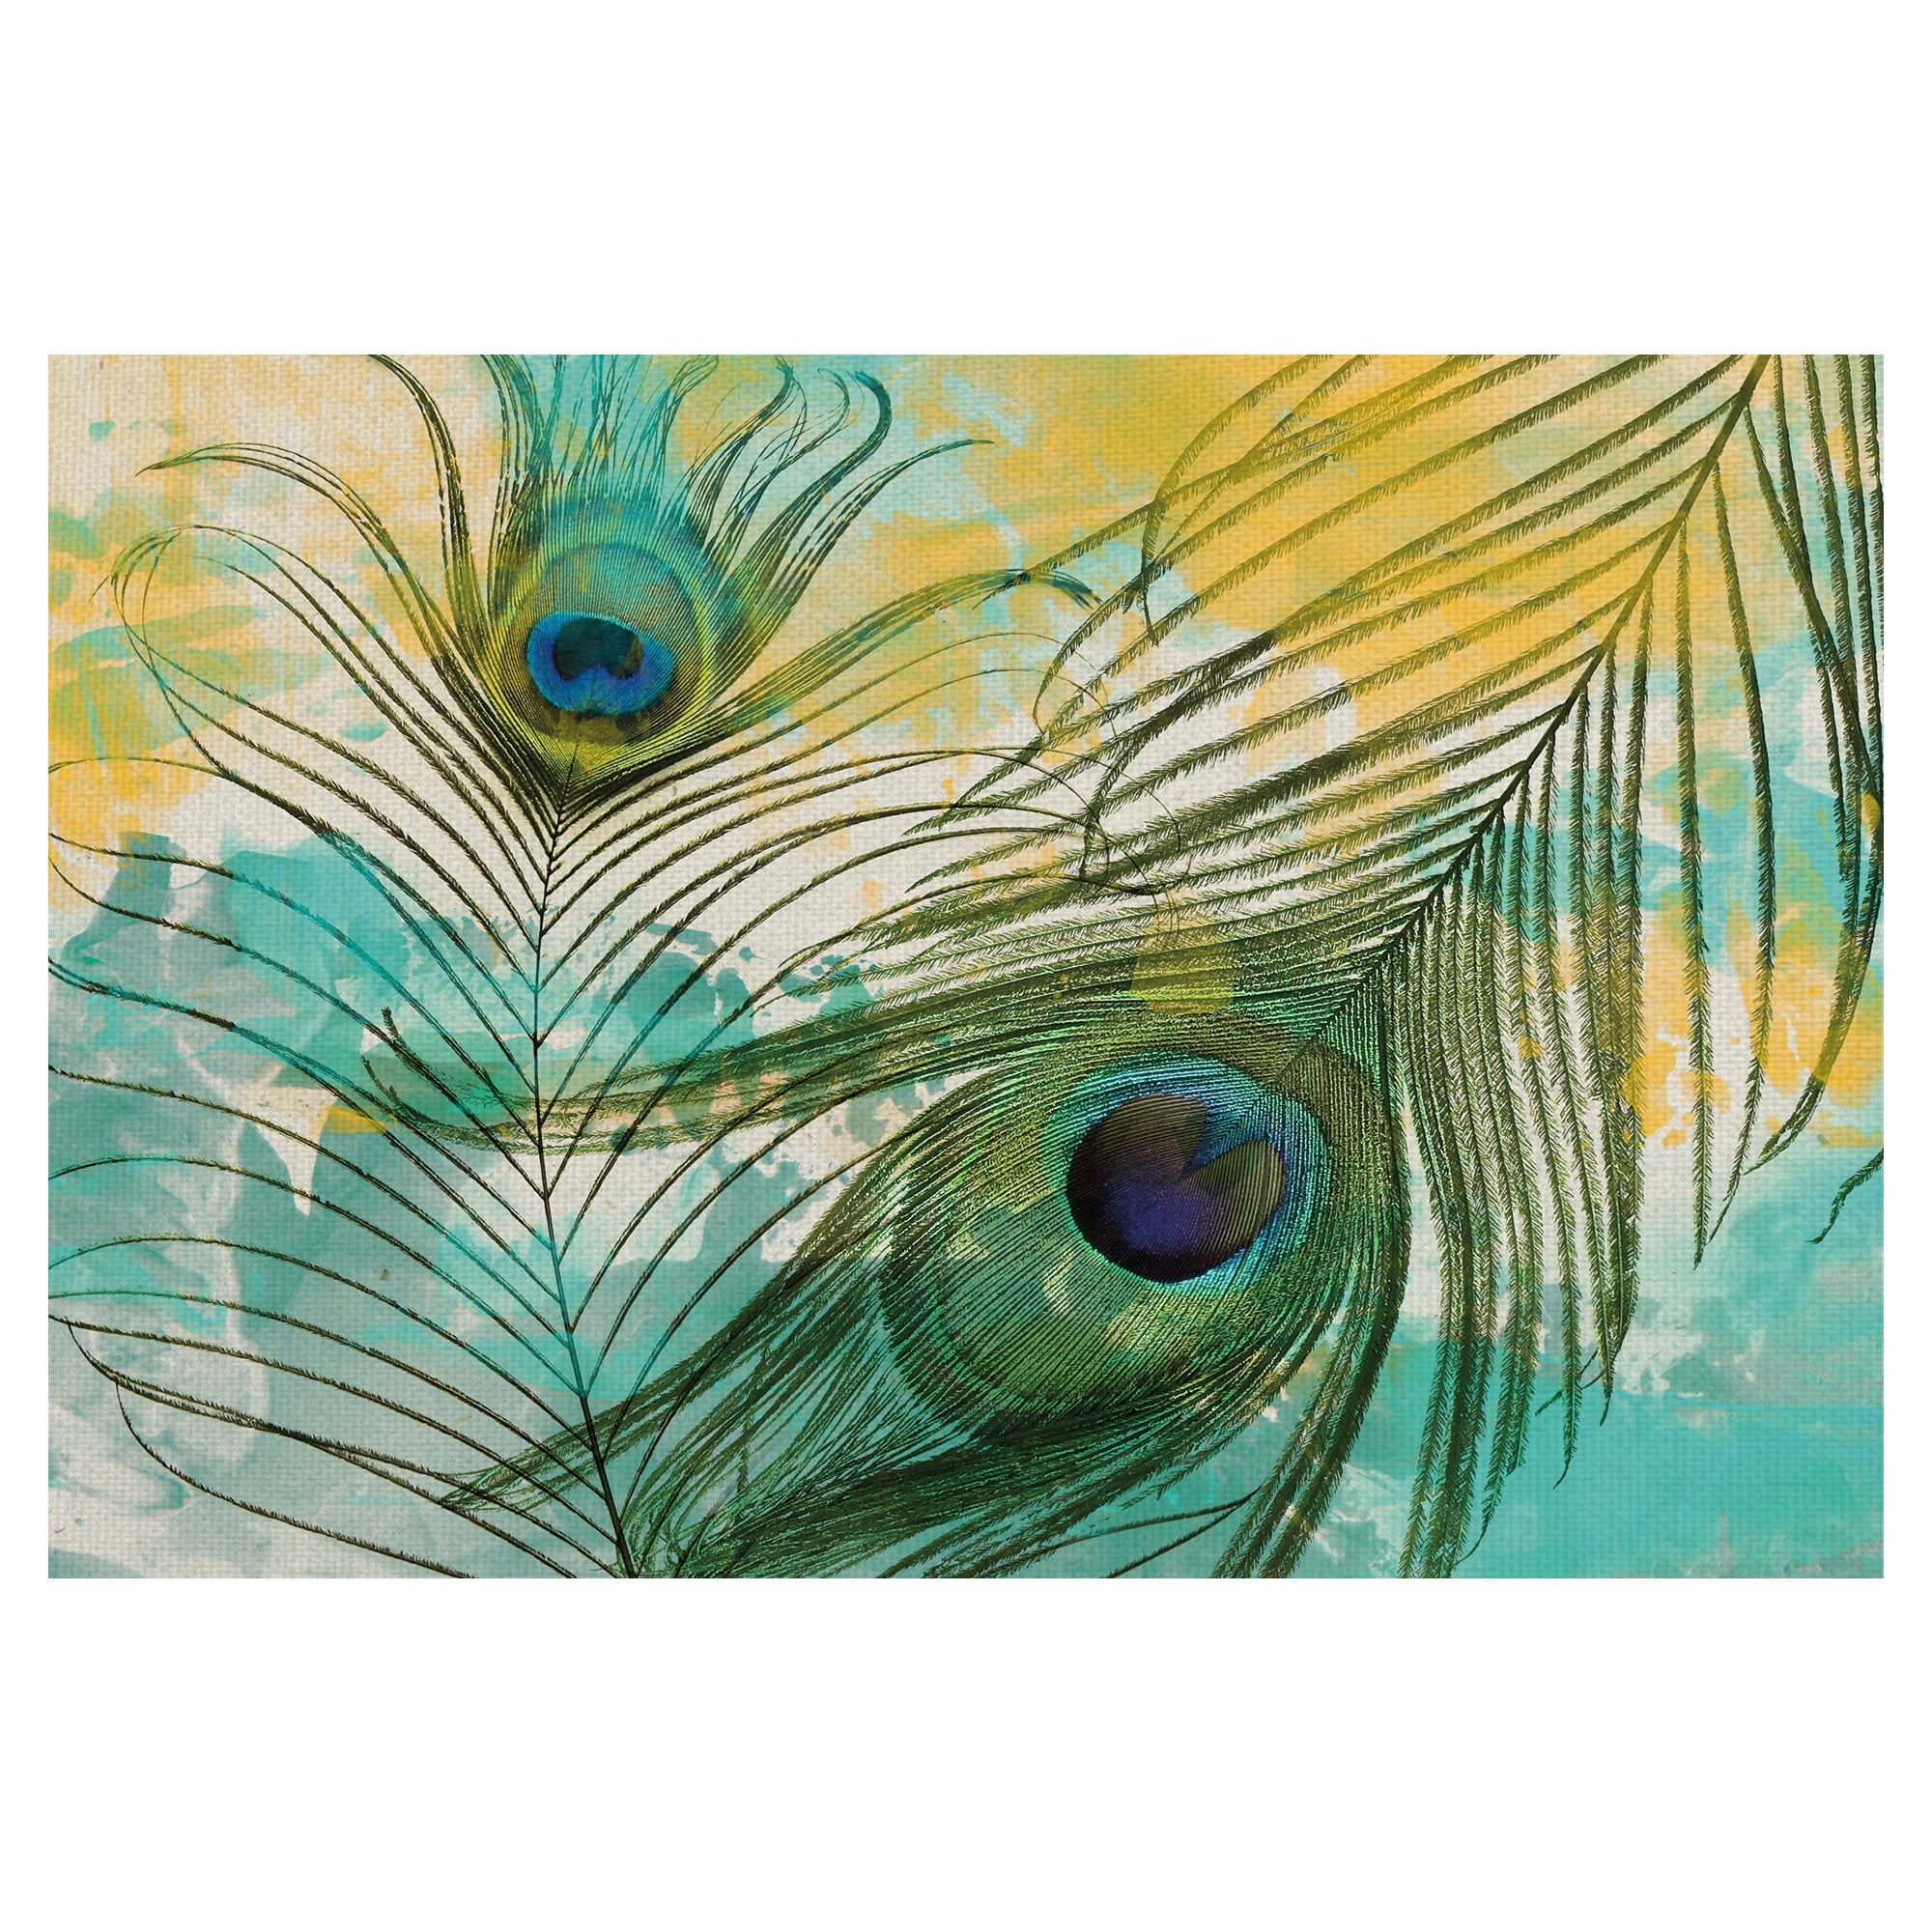 Masterpiece Art Gallery Painted Peacock Feathers by GI ArtLab Canvas ...